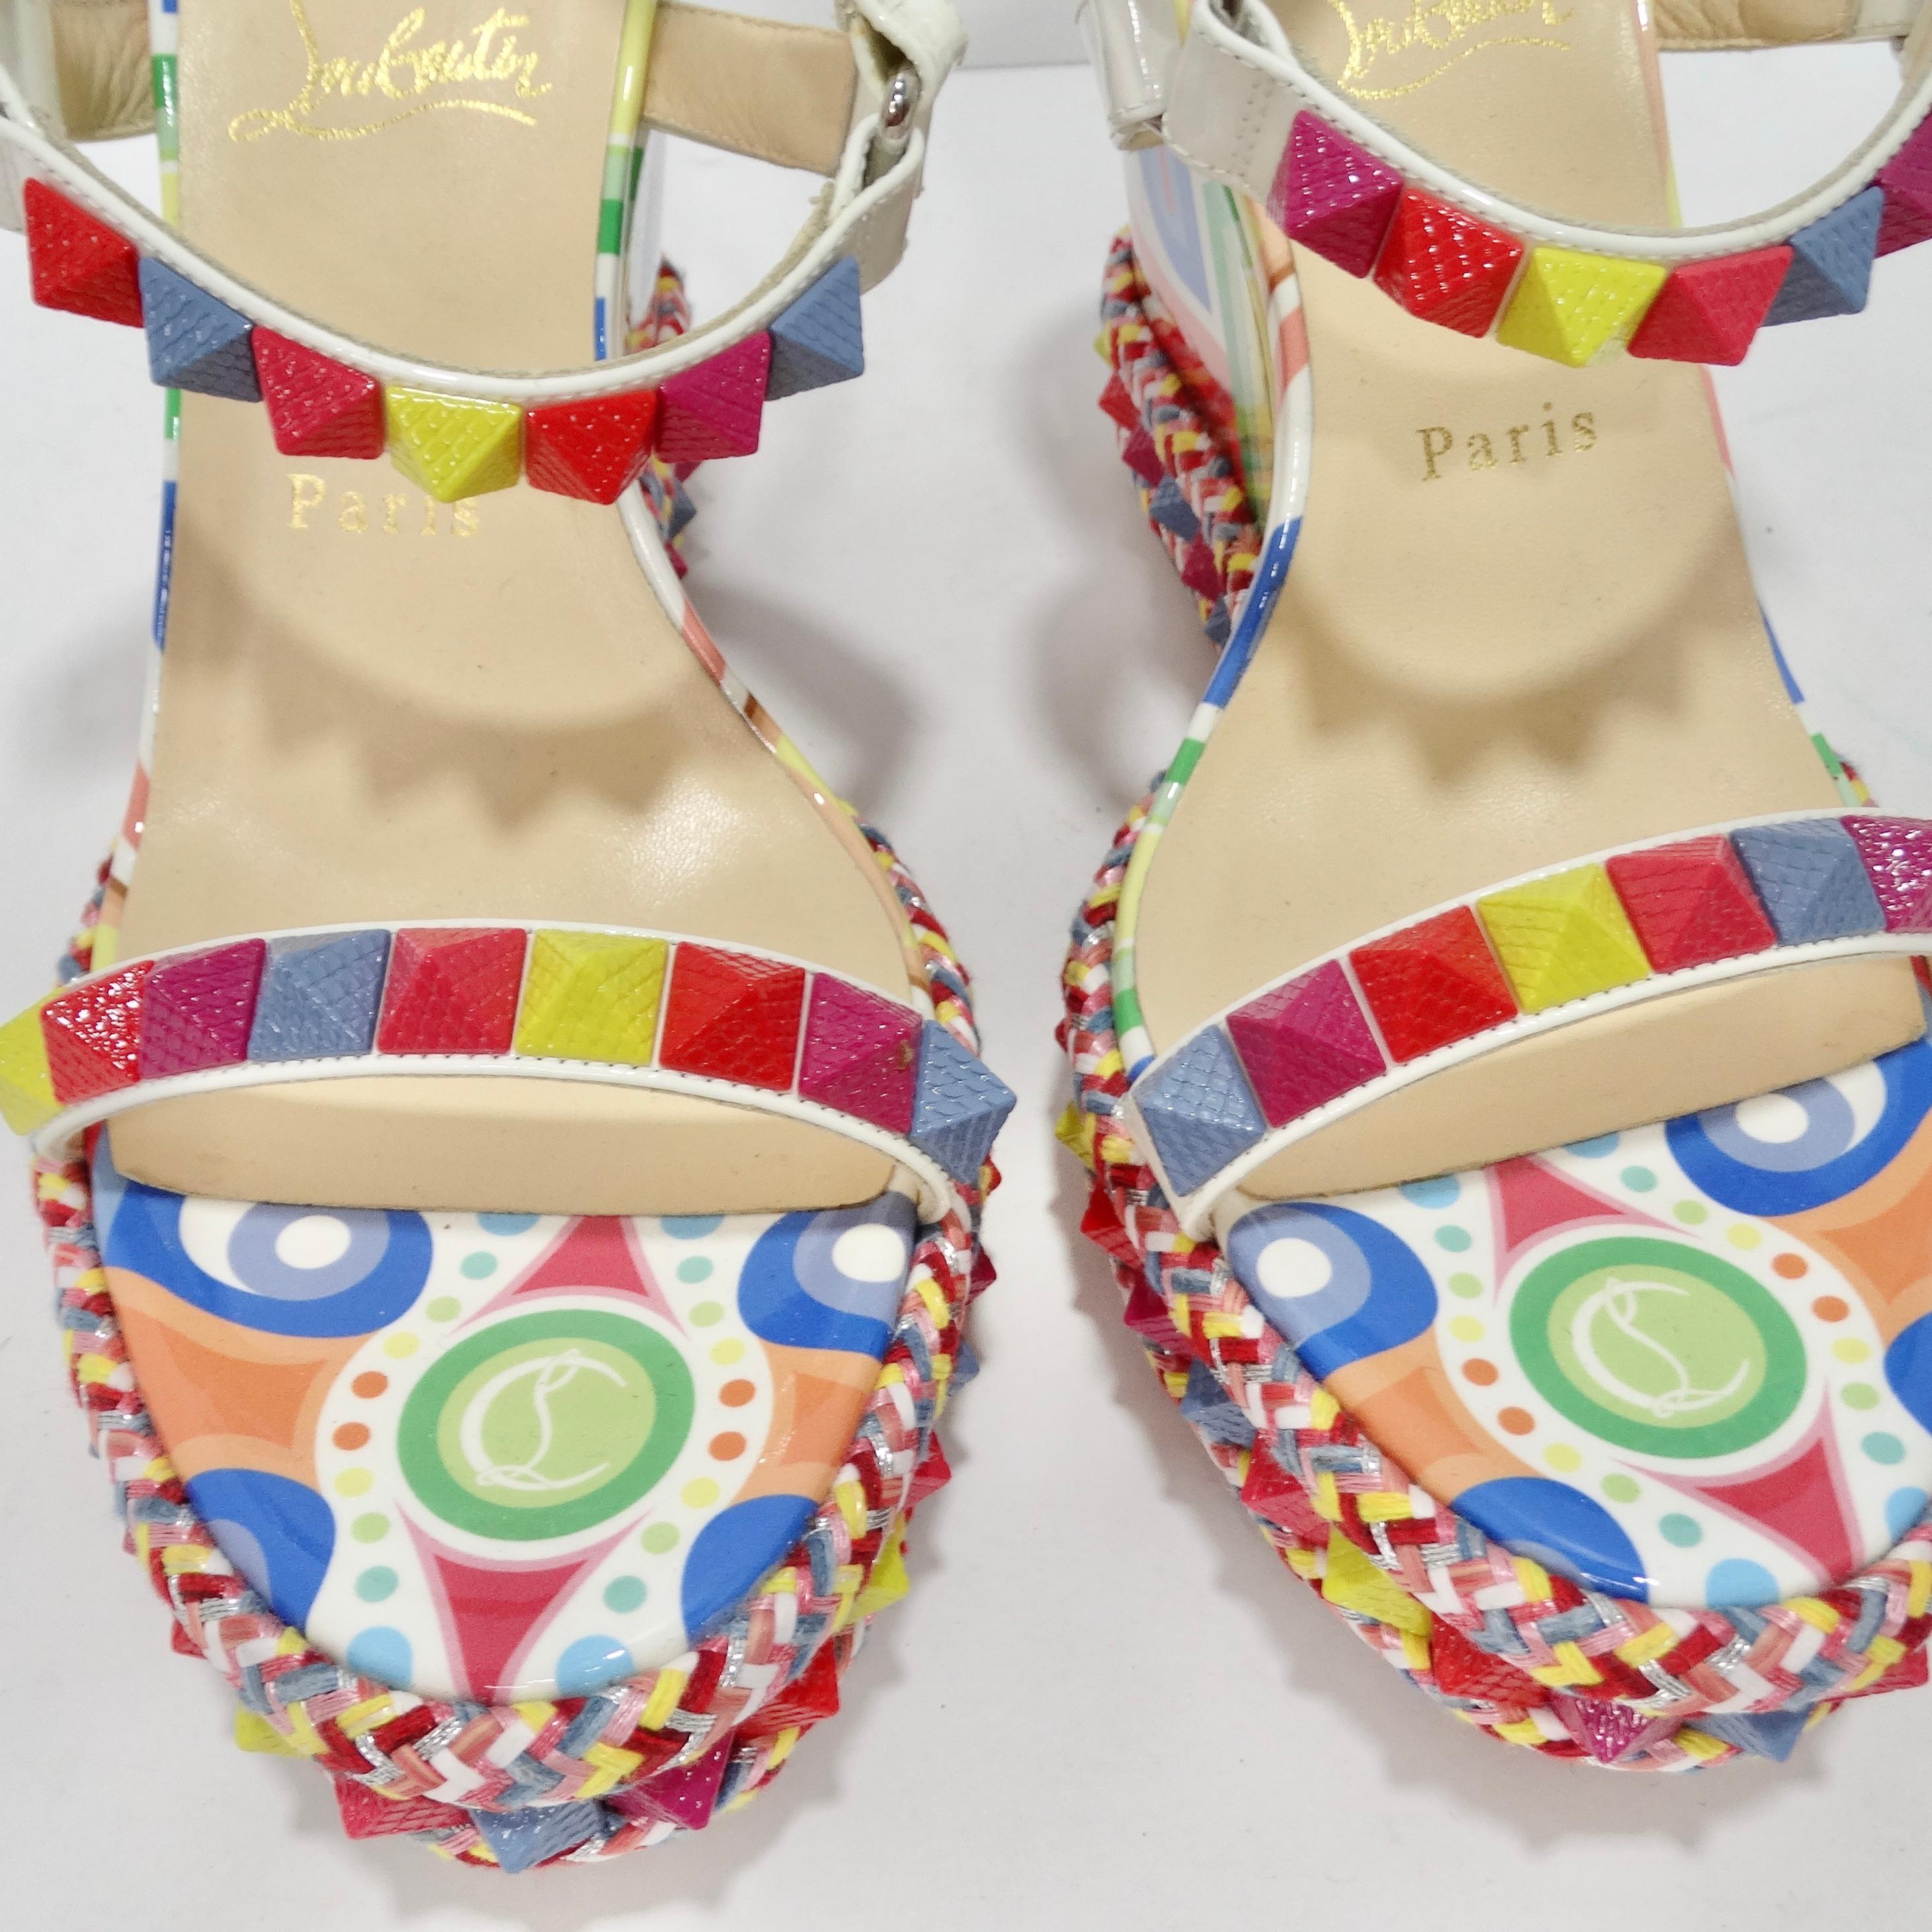 Beige Christian Louboutin Multicolor Printed Stud Wedges  For Sale